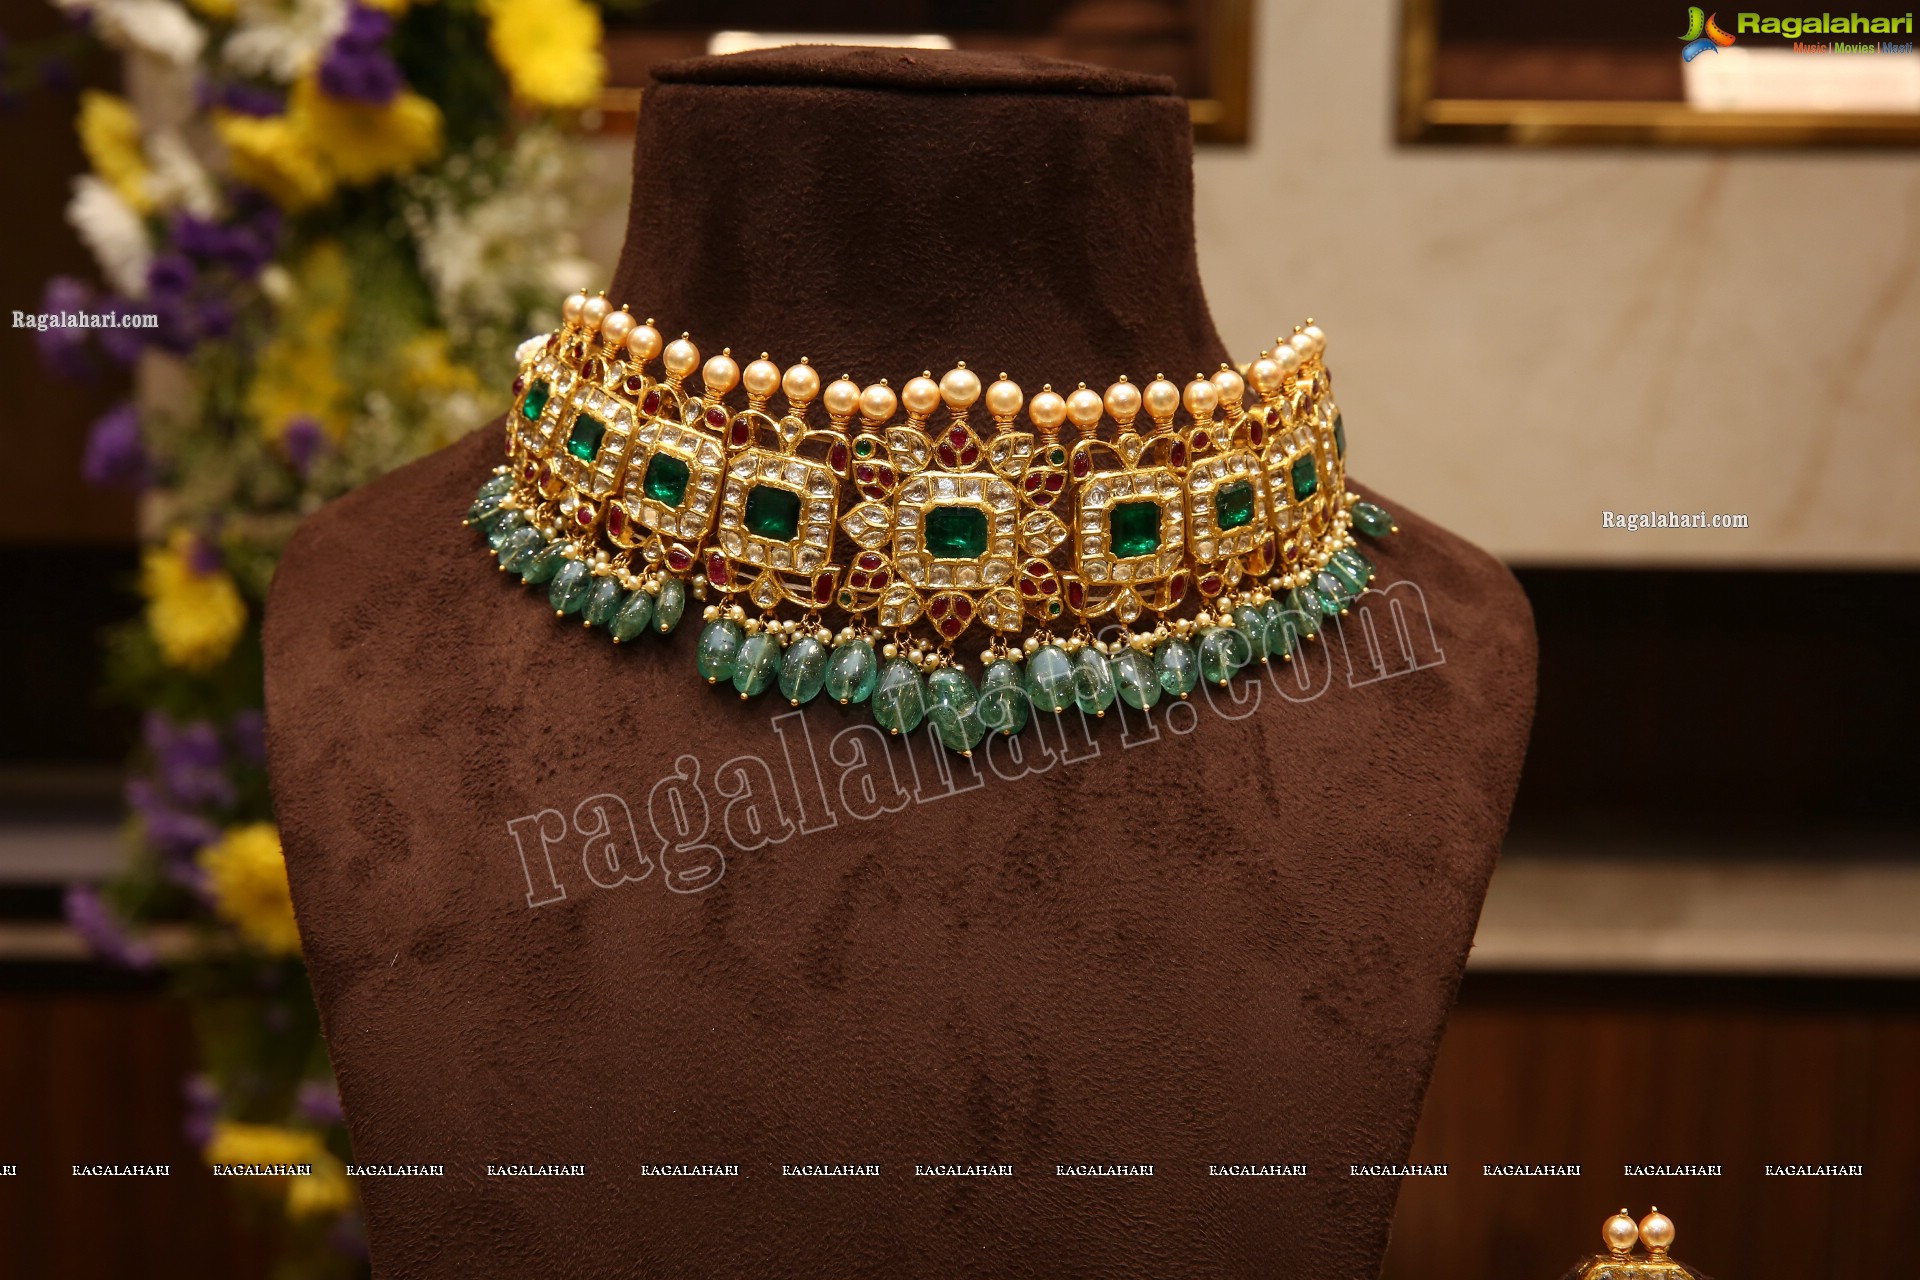 Ganesh Jewellers Showcases Its New Collection at Padma Rao Nagar Store in Hyderabad